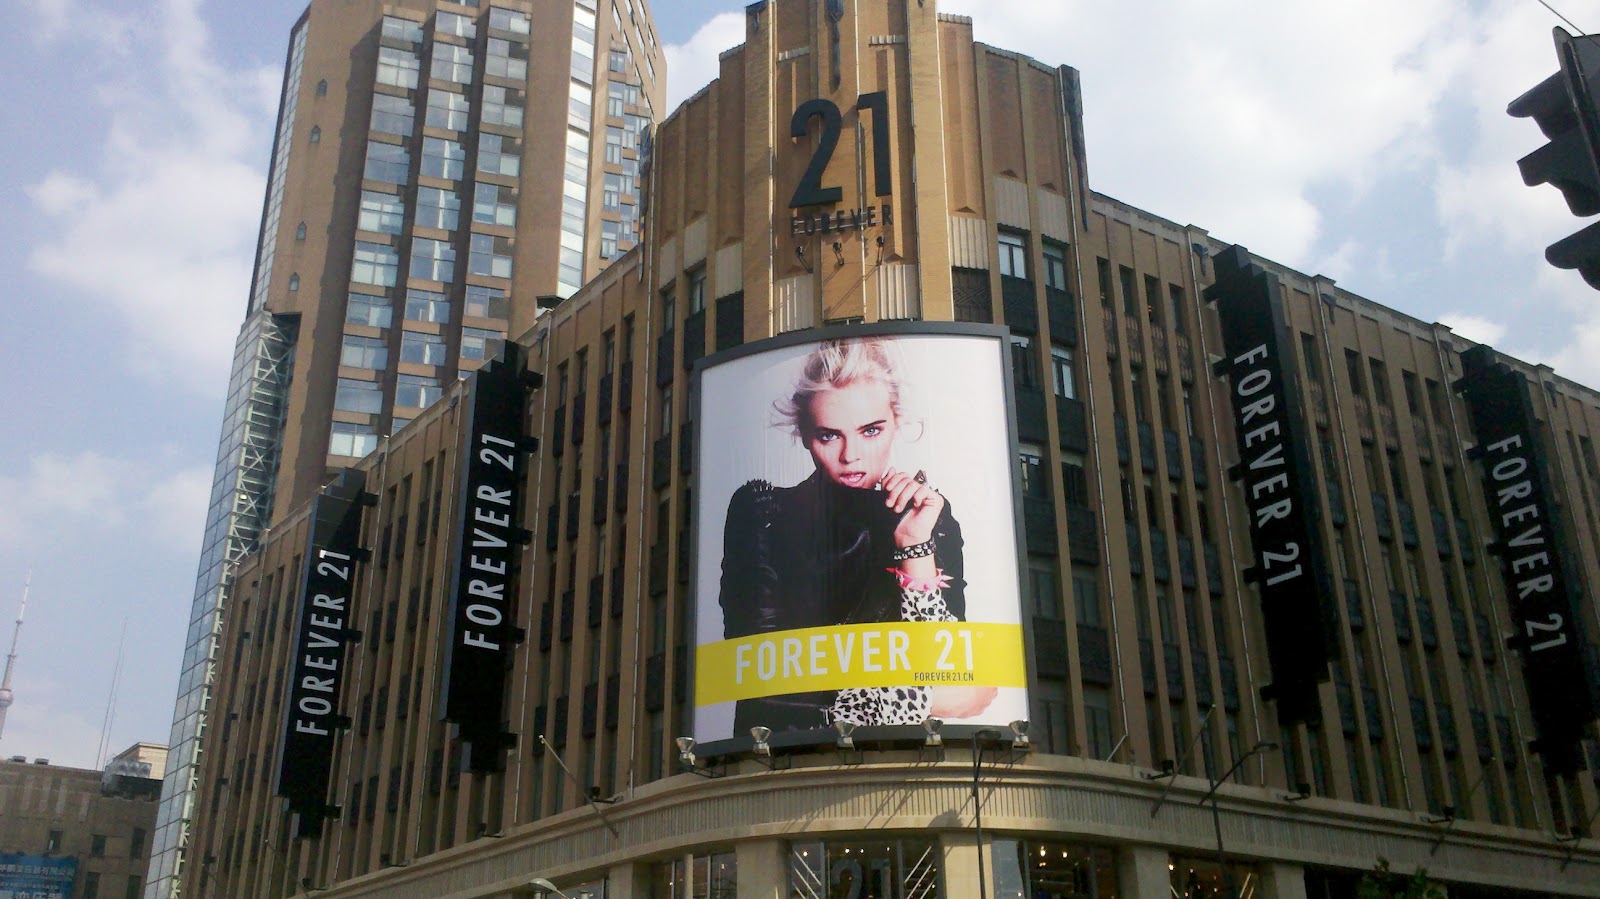 As of 2011, forever21 has opened over 480 stores worldwide.